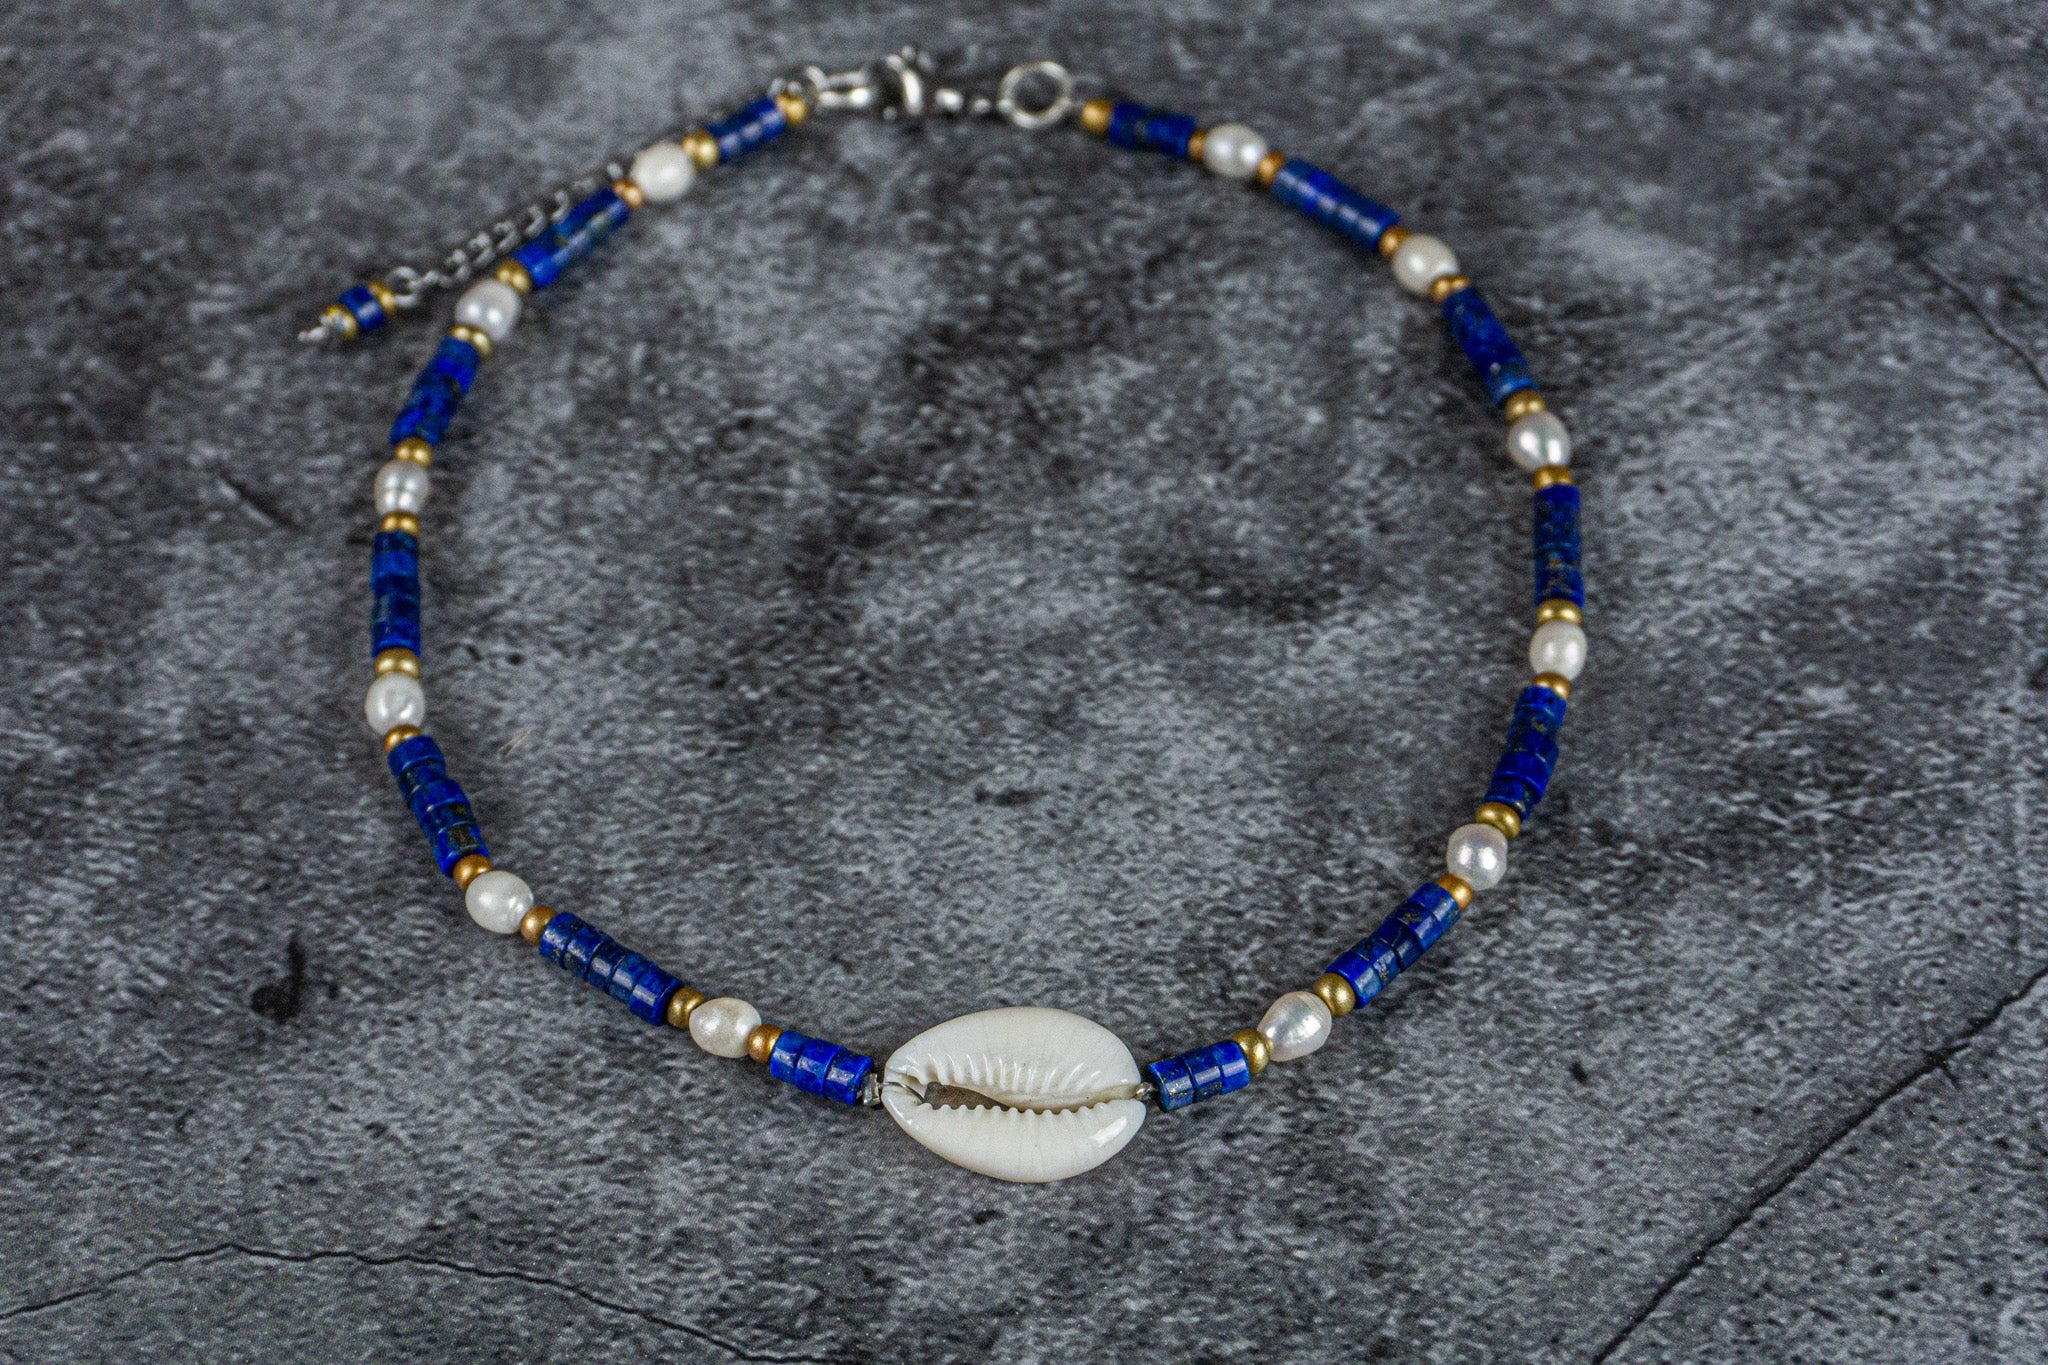 boho chic choker made of lapis lazuli heishi beads gemstone, pearl and a cowrie shell as a central piece- wander jewellery